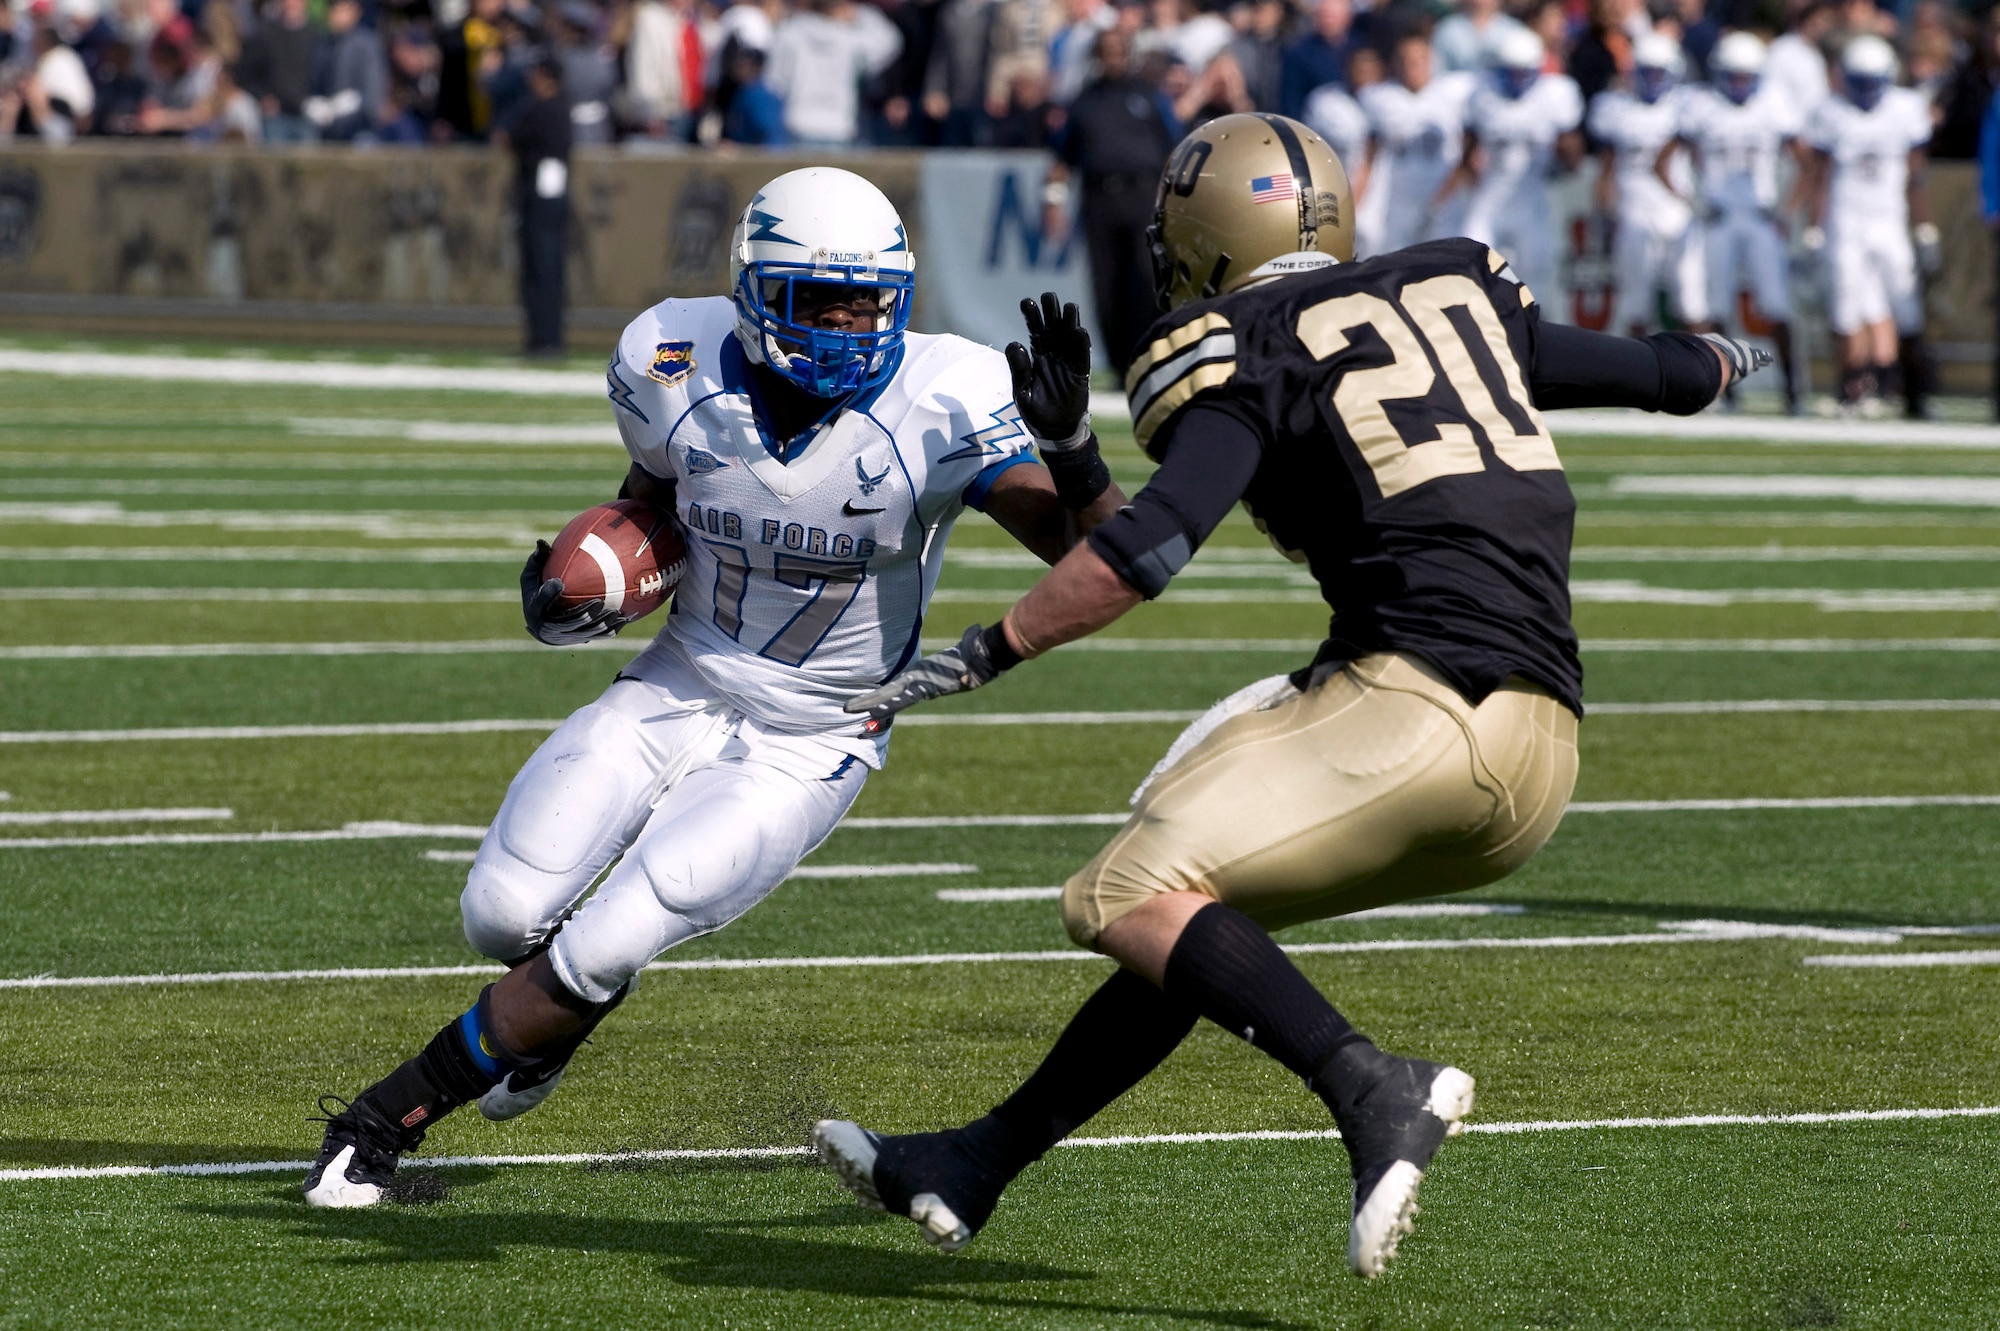 U.S. Air Force Academy quarterback Aster Clark attempts to avoid a tackle by U.S. Military Academy defensive back Lowell Garthwaite Nov. 1 at West Point, N.Y. Air Force defeated Army in their annual battle 16-7. (Defense Department photo/Navy Petty Officer 1st Class Chad J. McNeeley) 